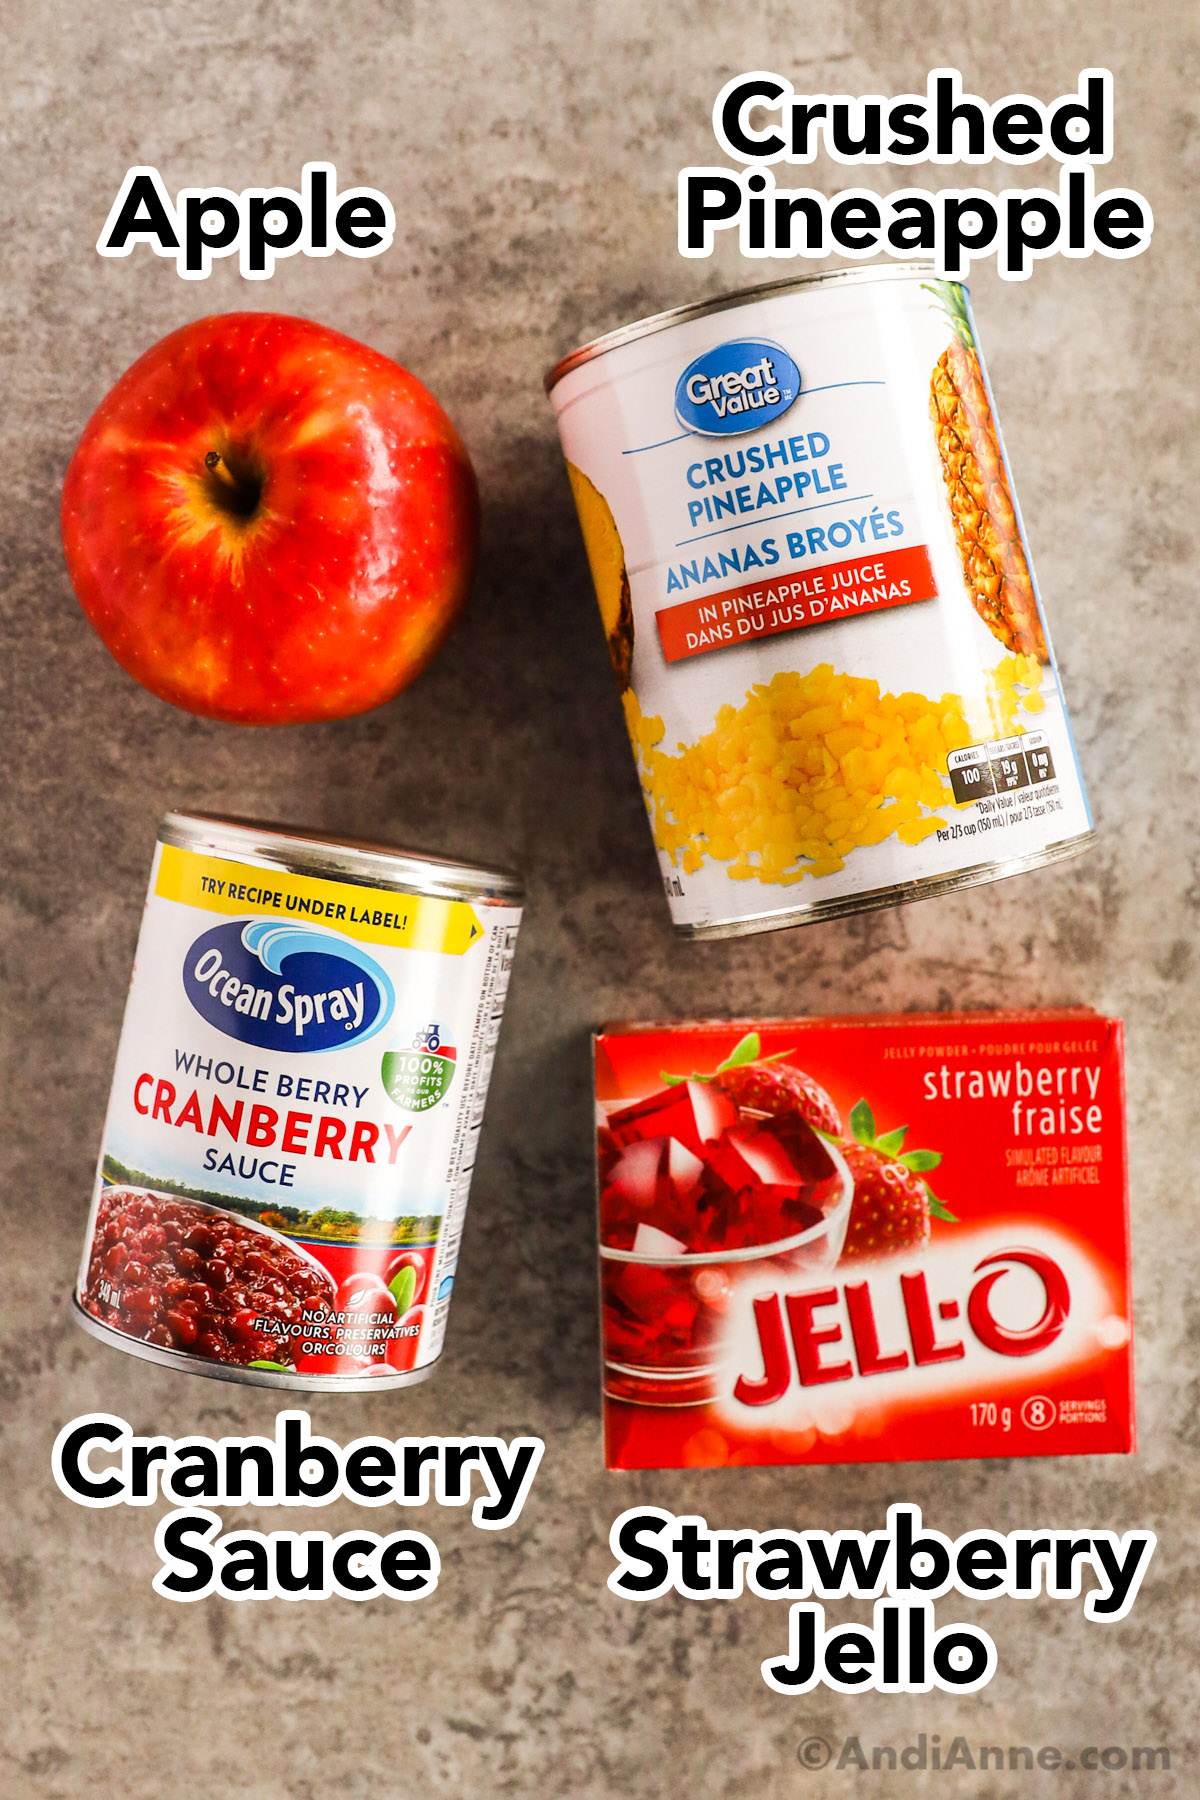 An apple, can of crushed pineapple, canned cranberry sauce, and box of strawberry jello.